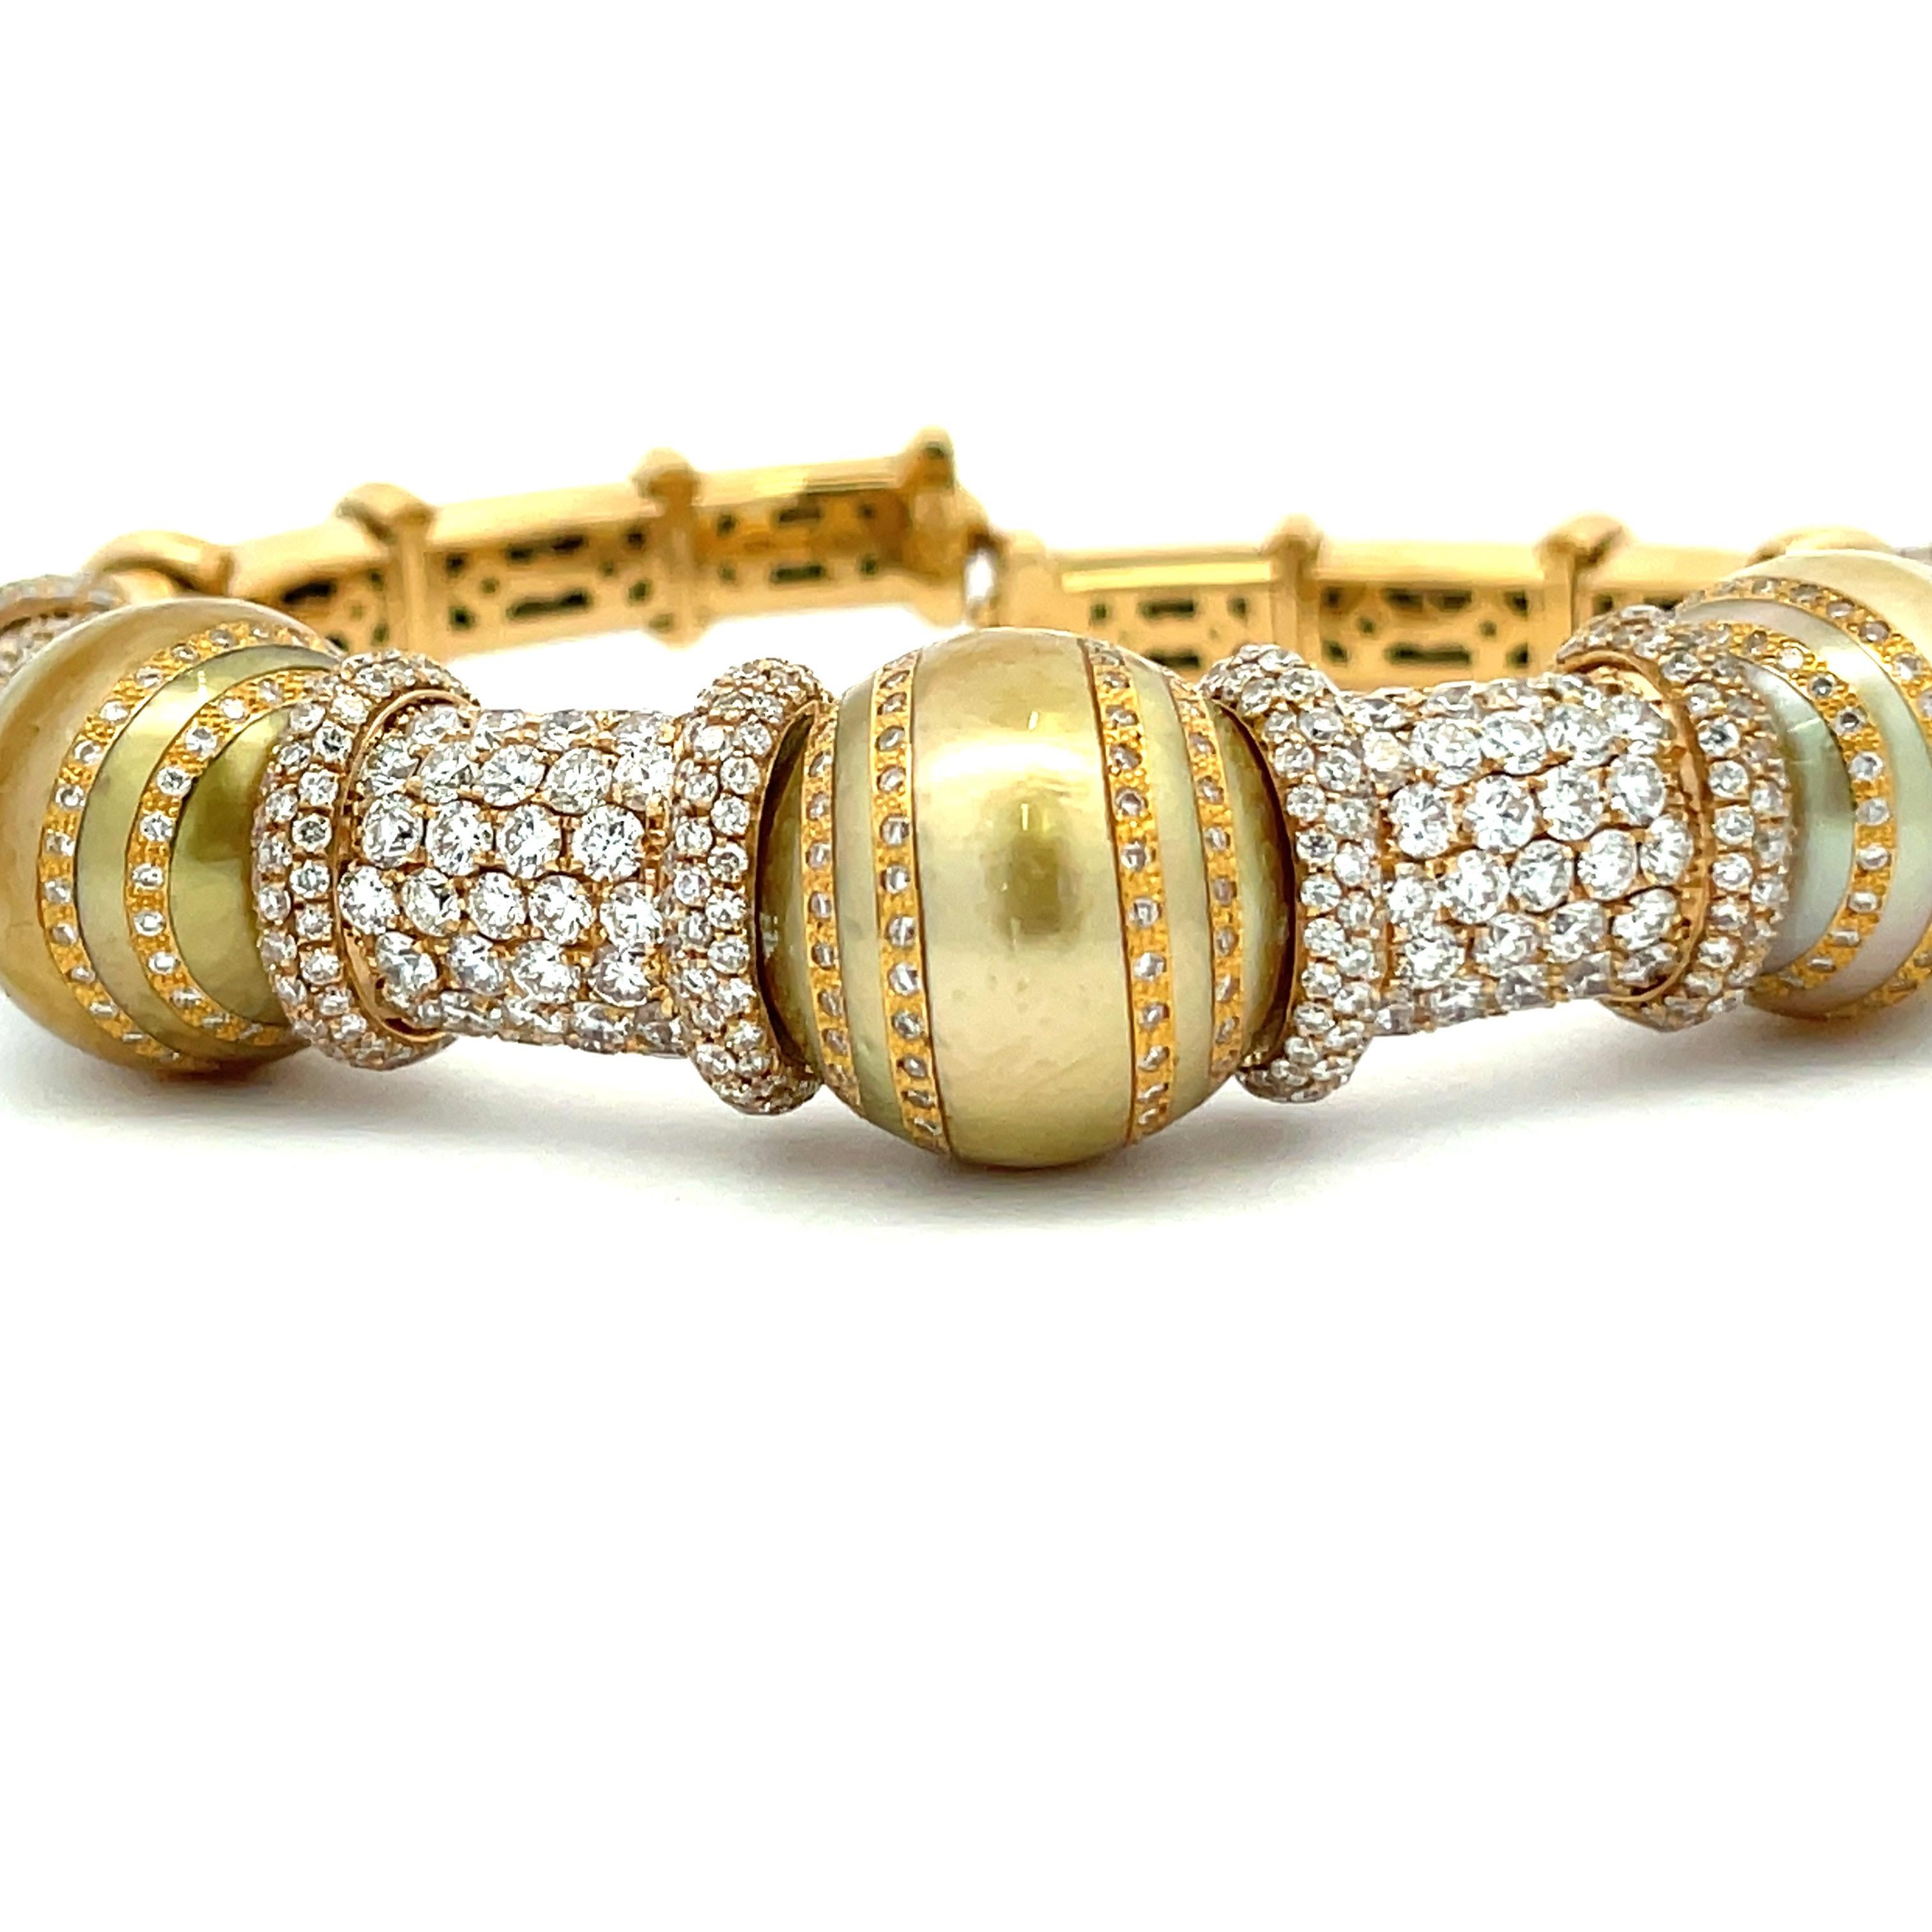 VERDI, 18 Karat yellow gold bangle featuring three Golden South Sea Pearls measuring 14-15 mm flanked with diamonds throughout weighing 8.58 Carats.  
8.58 cts
